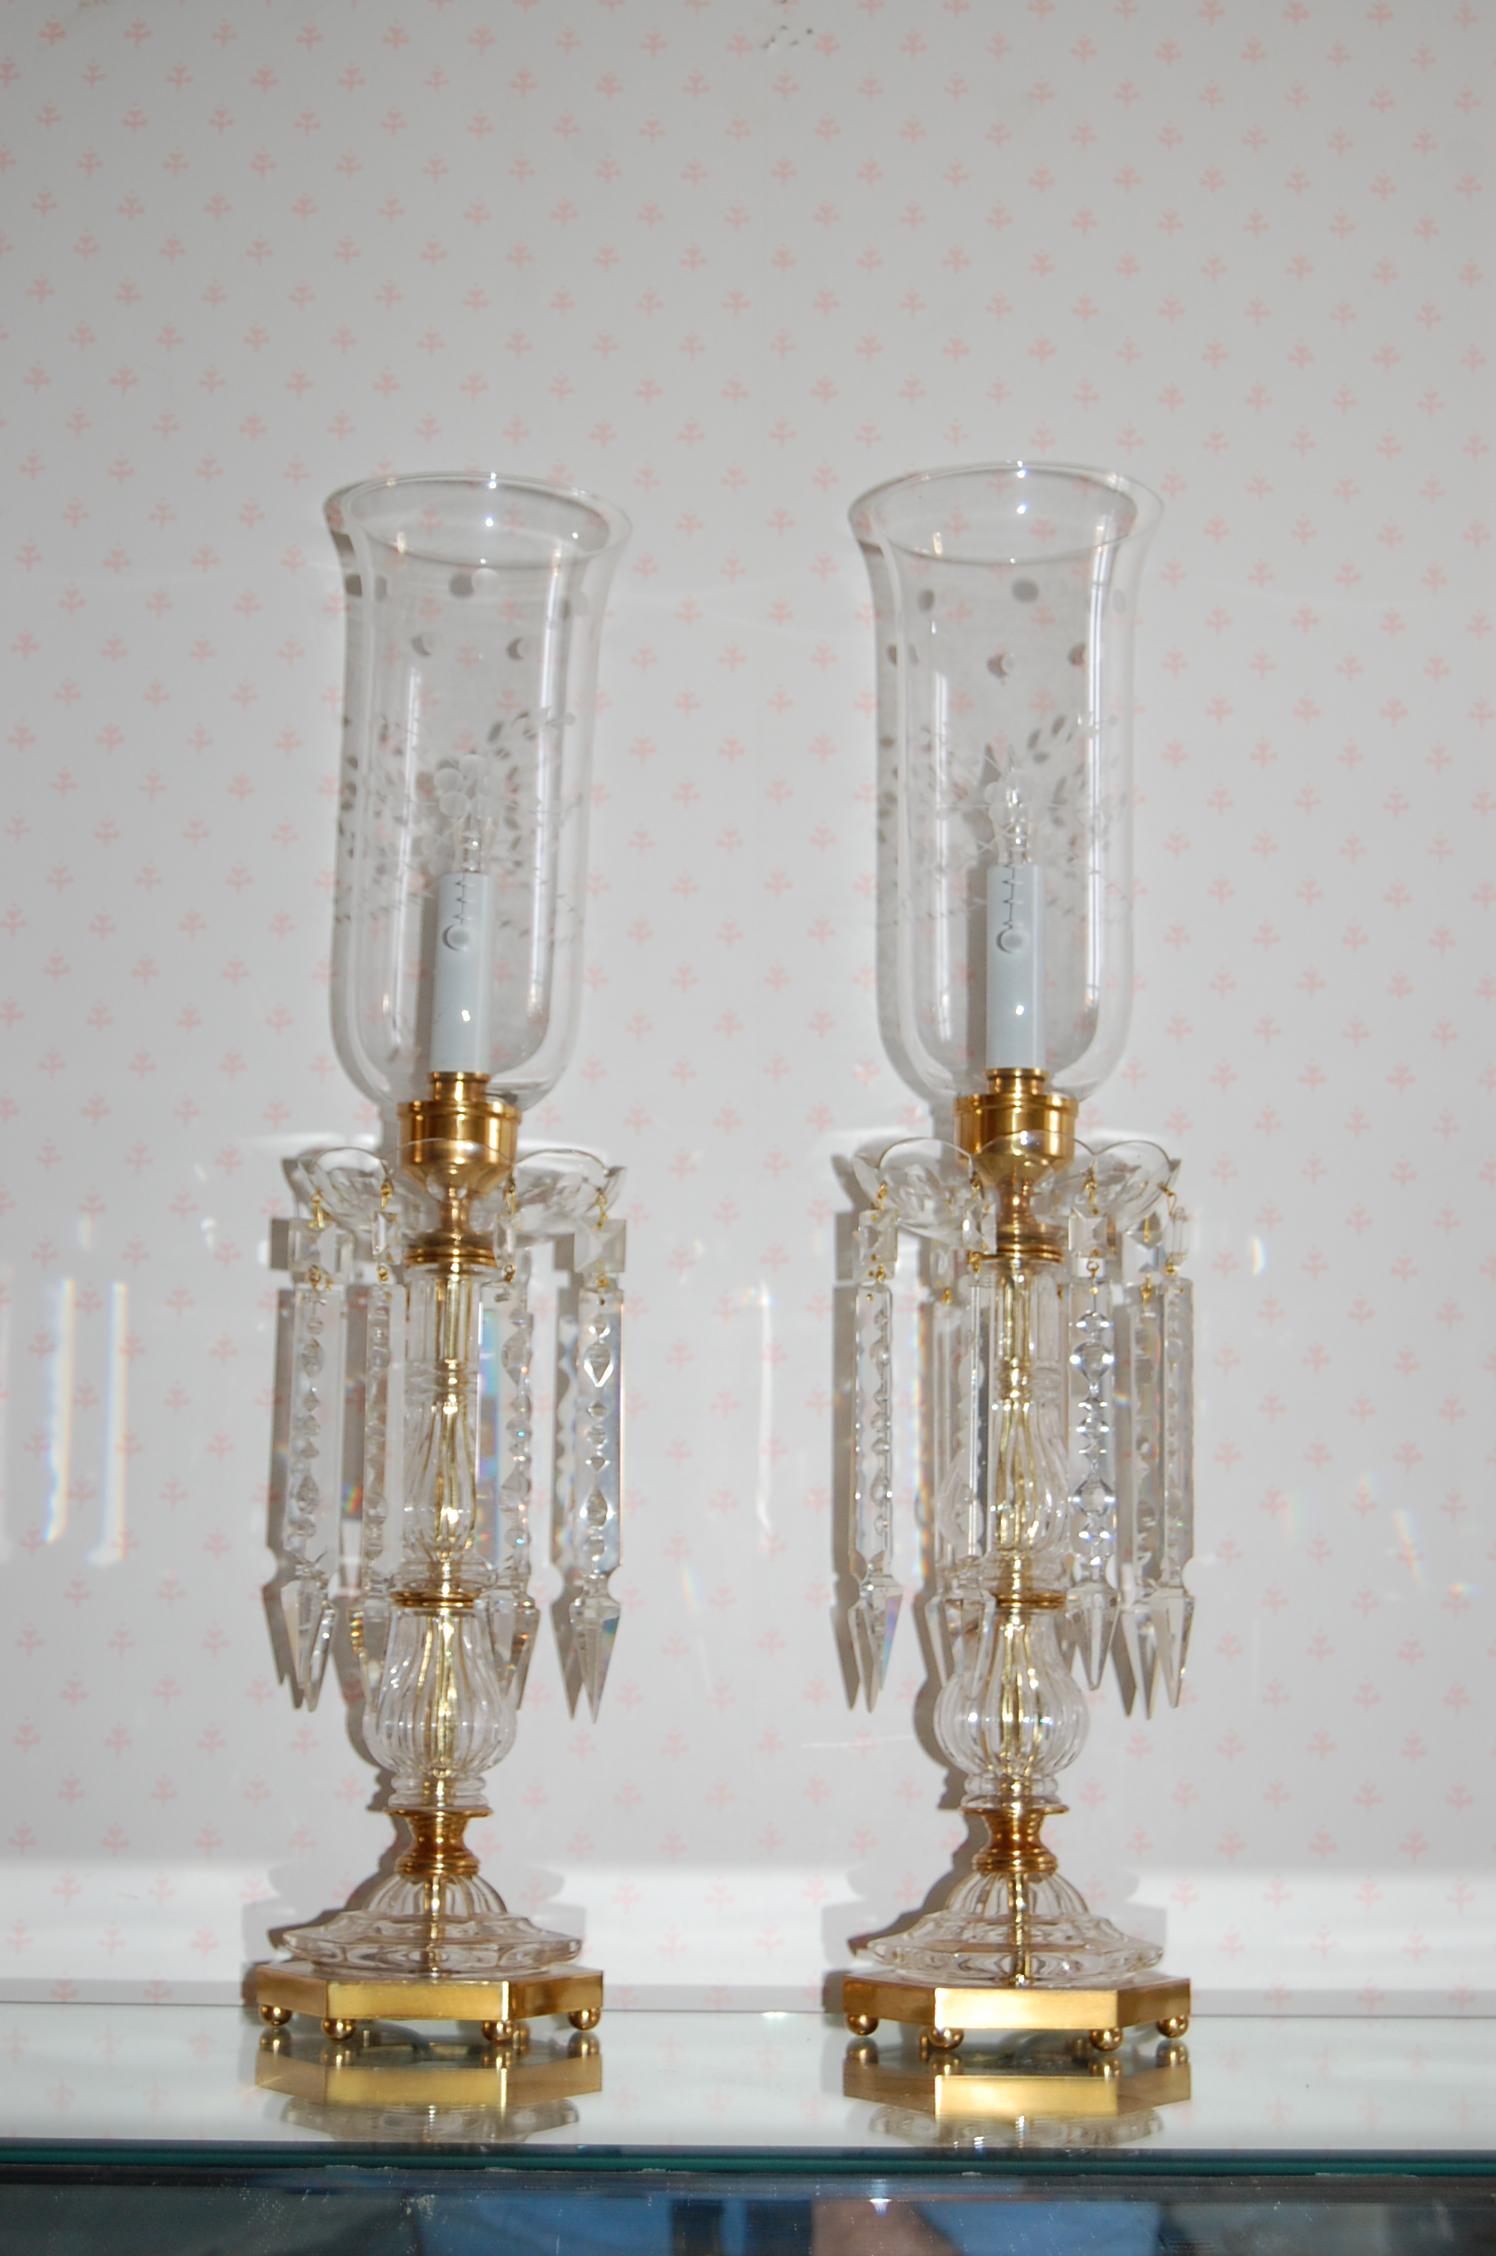 Pair of crystal lamps with glass hurricanes and long crystal drops in excellent condition. New wiring, cleaned, polished and lacquered.